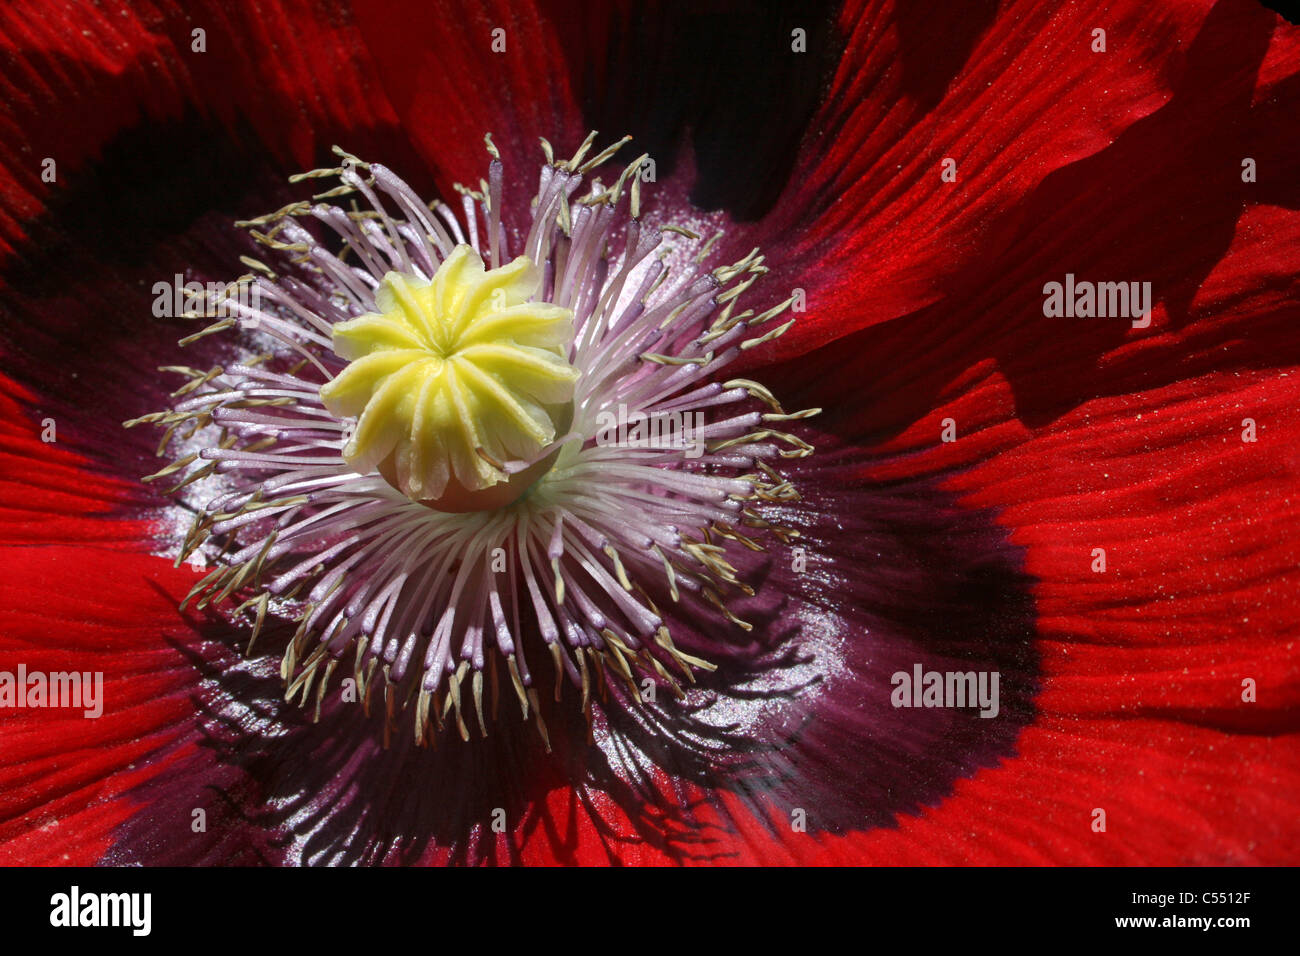 Close Up Of The Stamens And stigma Of An Oriental Poppy Flower Stock Photo